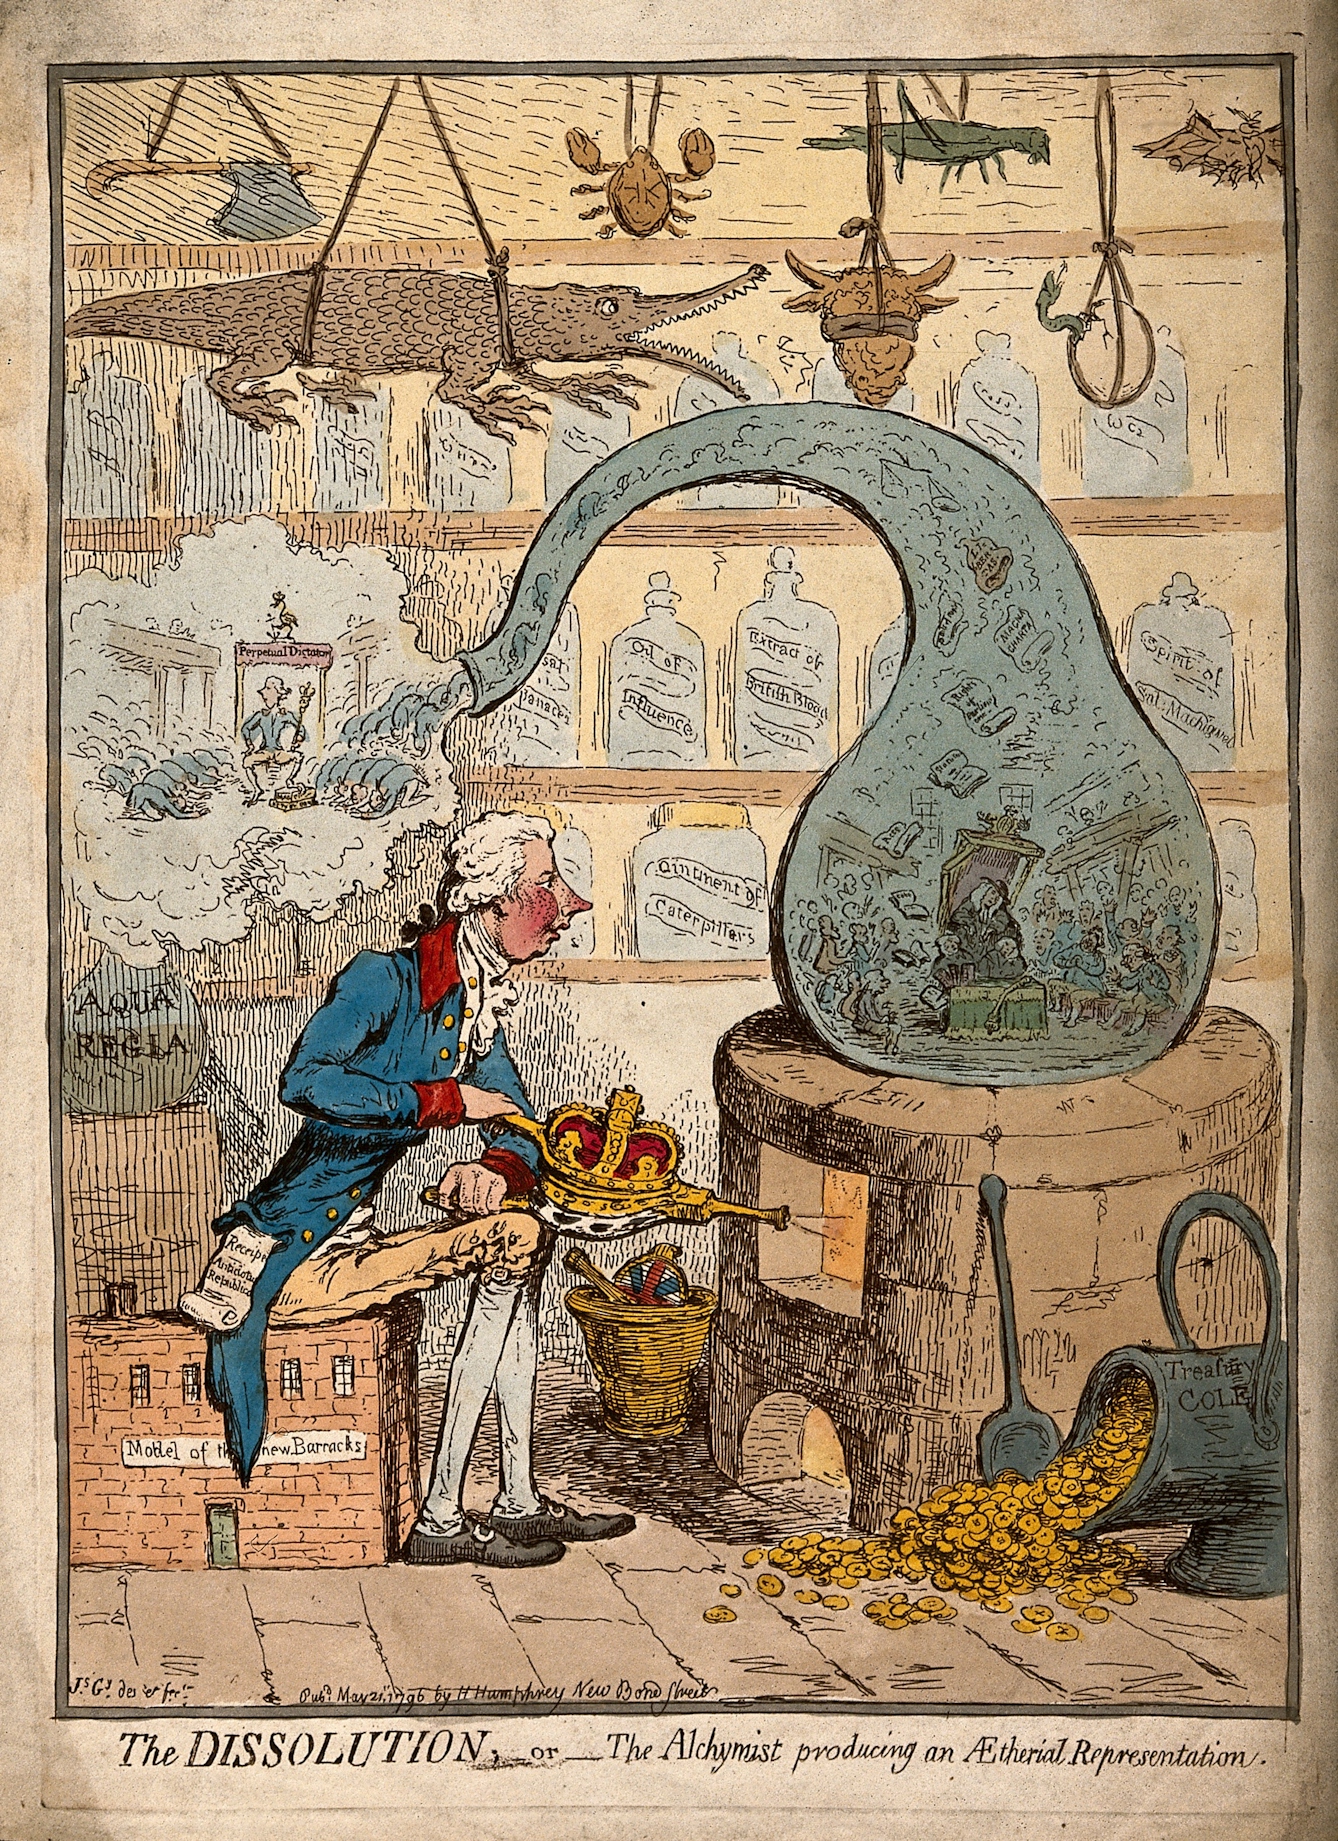 An alchemist using a crown-shaped bellows to blow the flames of a furnace and heat a glass vessel in which the House of Commons is distilled; satirizing the dissolution of parliament by Pitt.